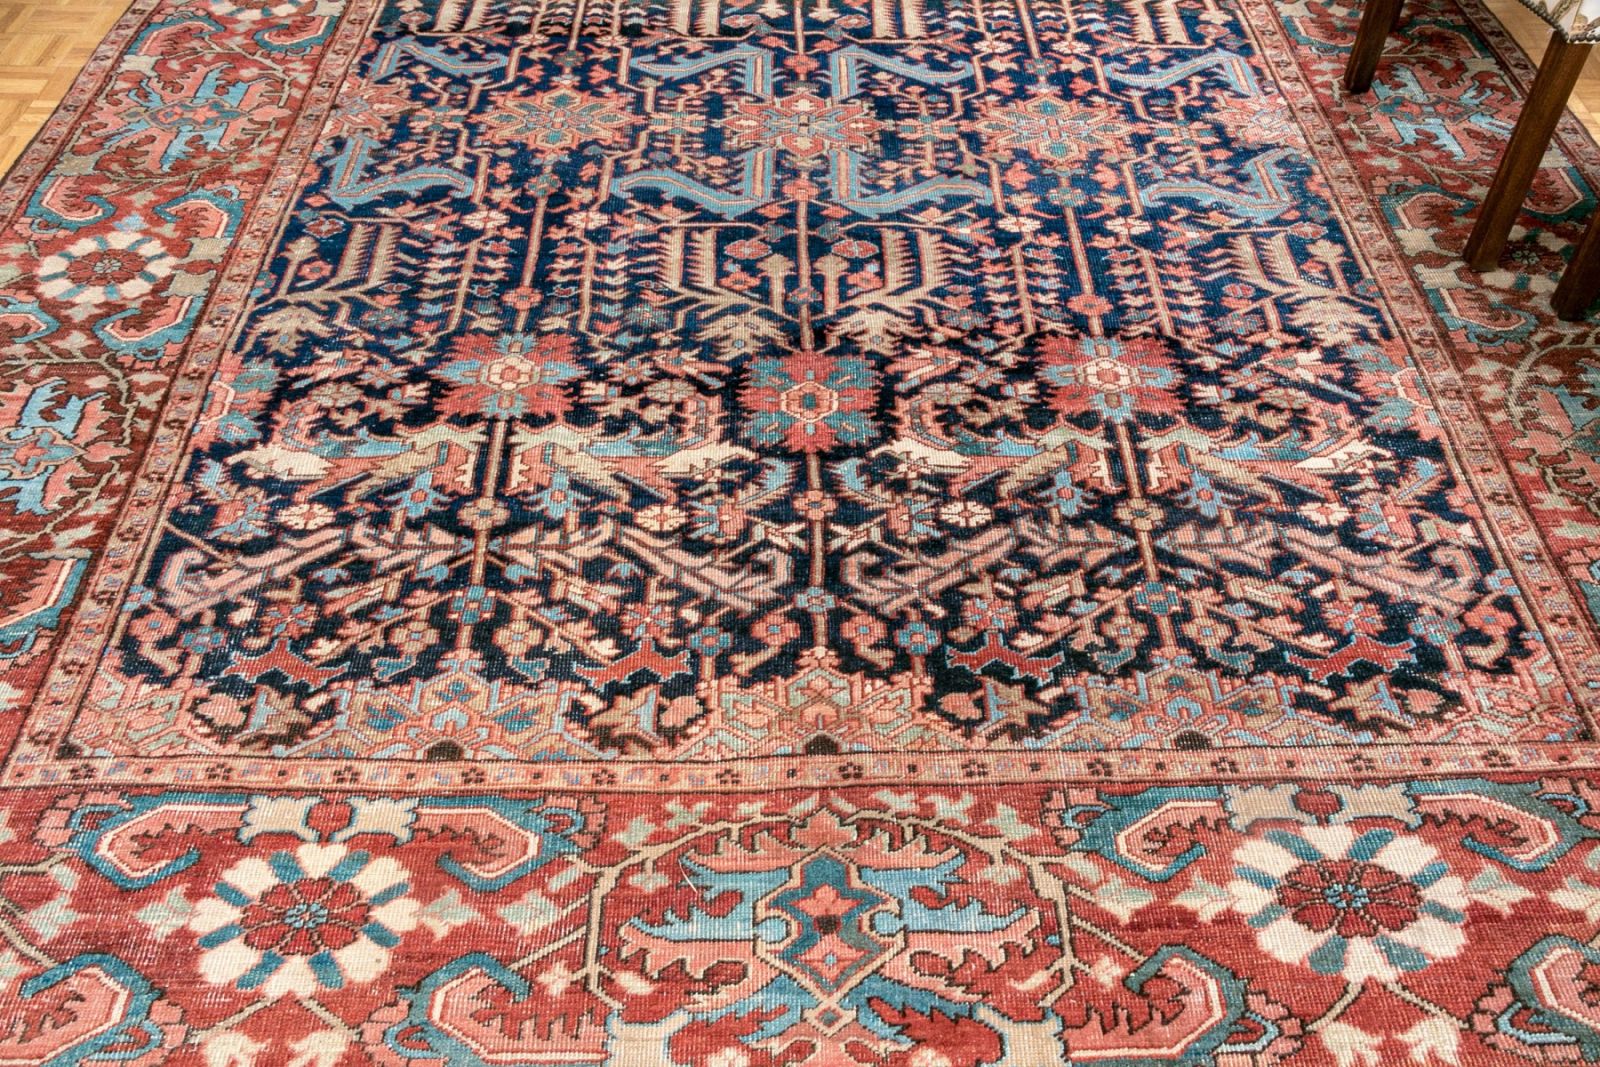 A finely made Persian Heriz hand-knotted wool carpet at least 80-100 years old.